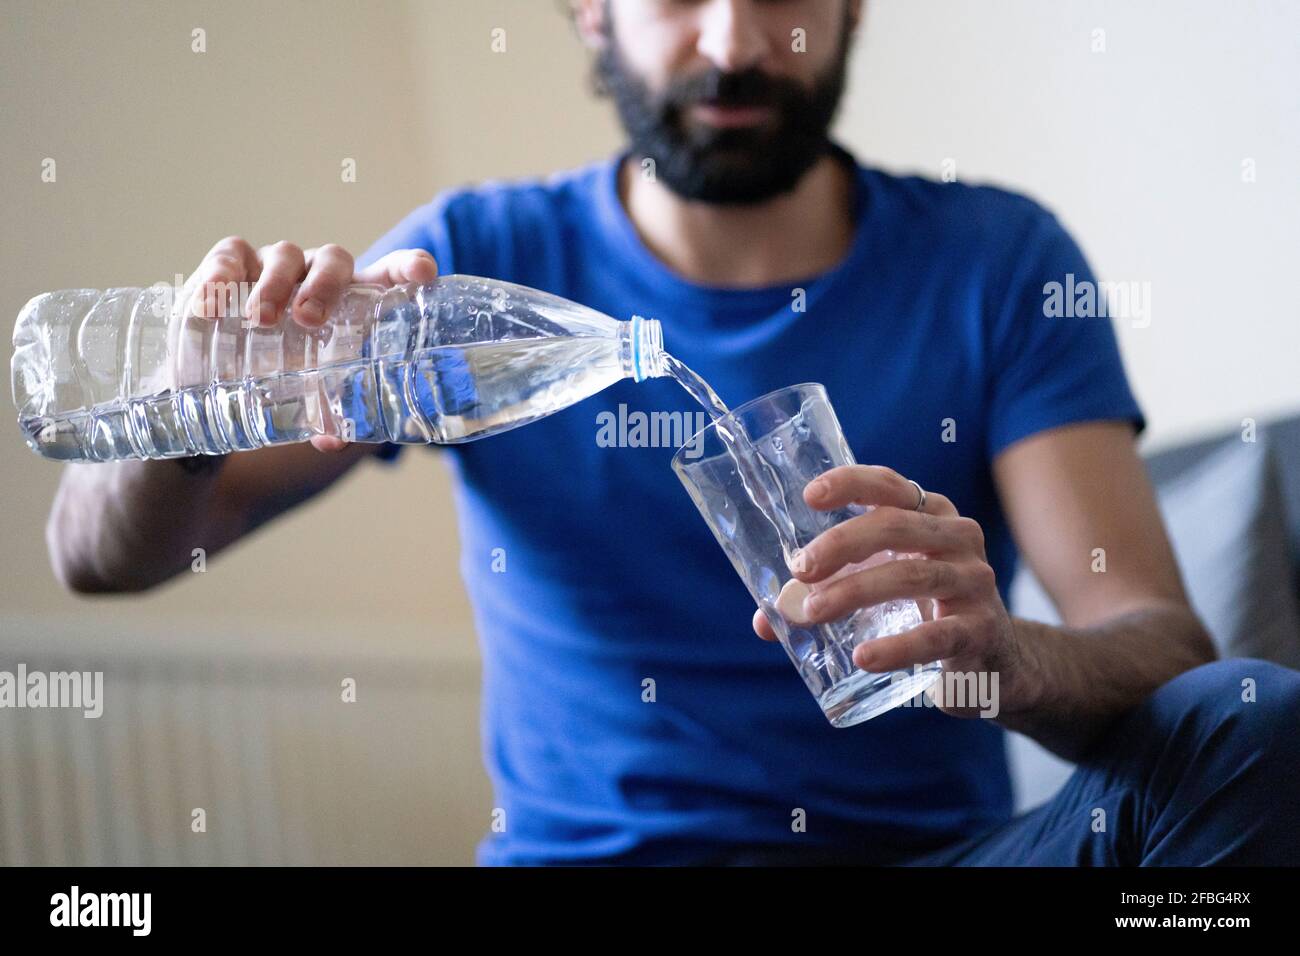 https://c8.alamy.com/comp/2FBG4RX/thirsty-young-man-pouring-water-in-drinking-glass-at-home-2FBG4RX.jpg